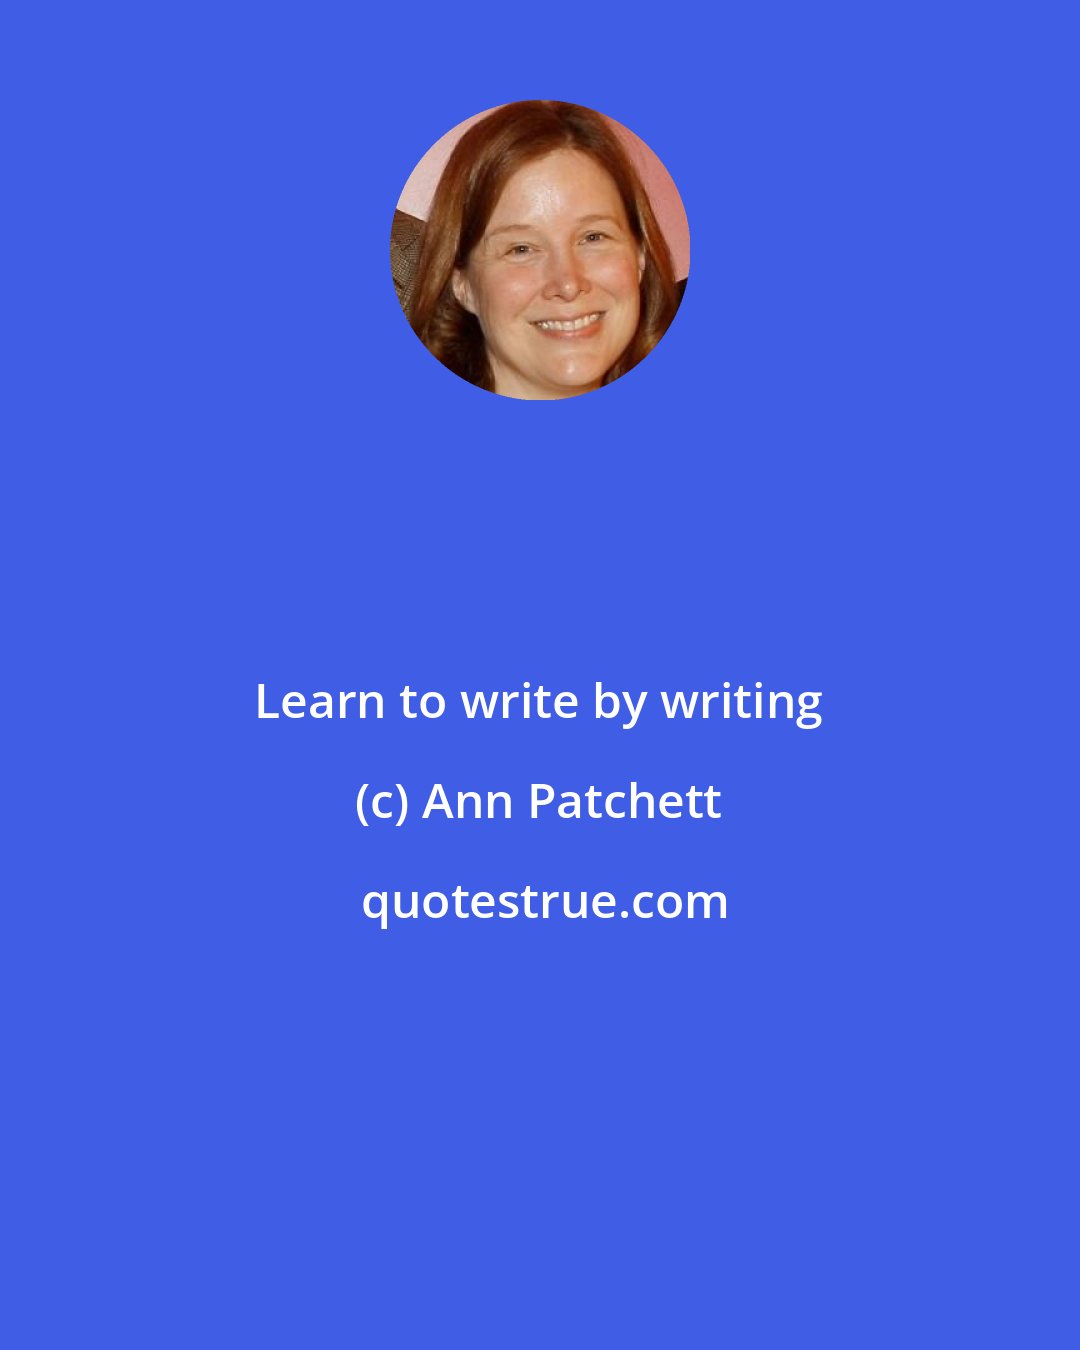 Ann Patchett: Learn to write by writing